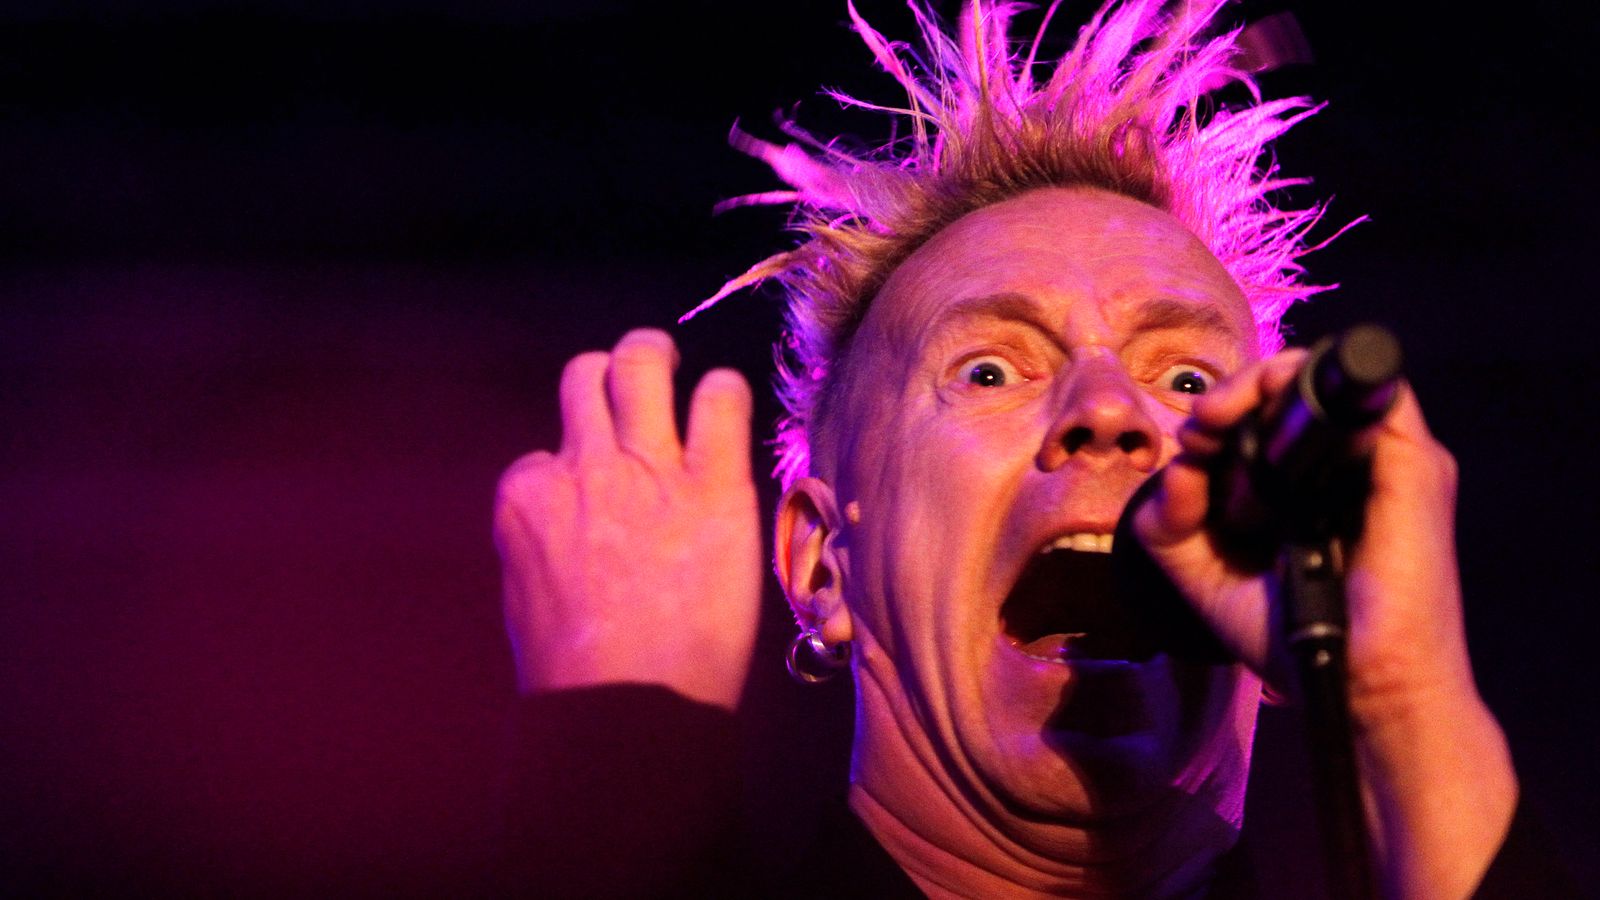 Eurovision: Former Sex Pistols’ frontman John Lydon fails to win place representing Ireland | Ents & Arts News